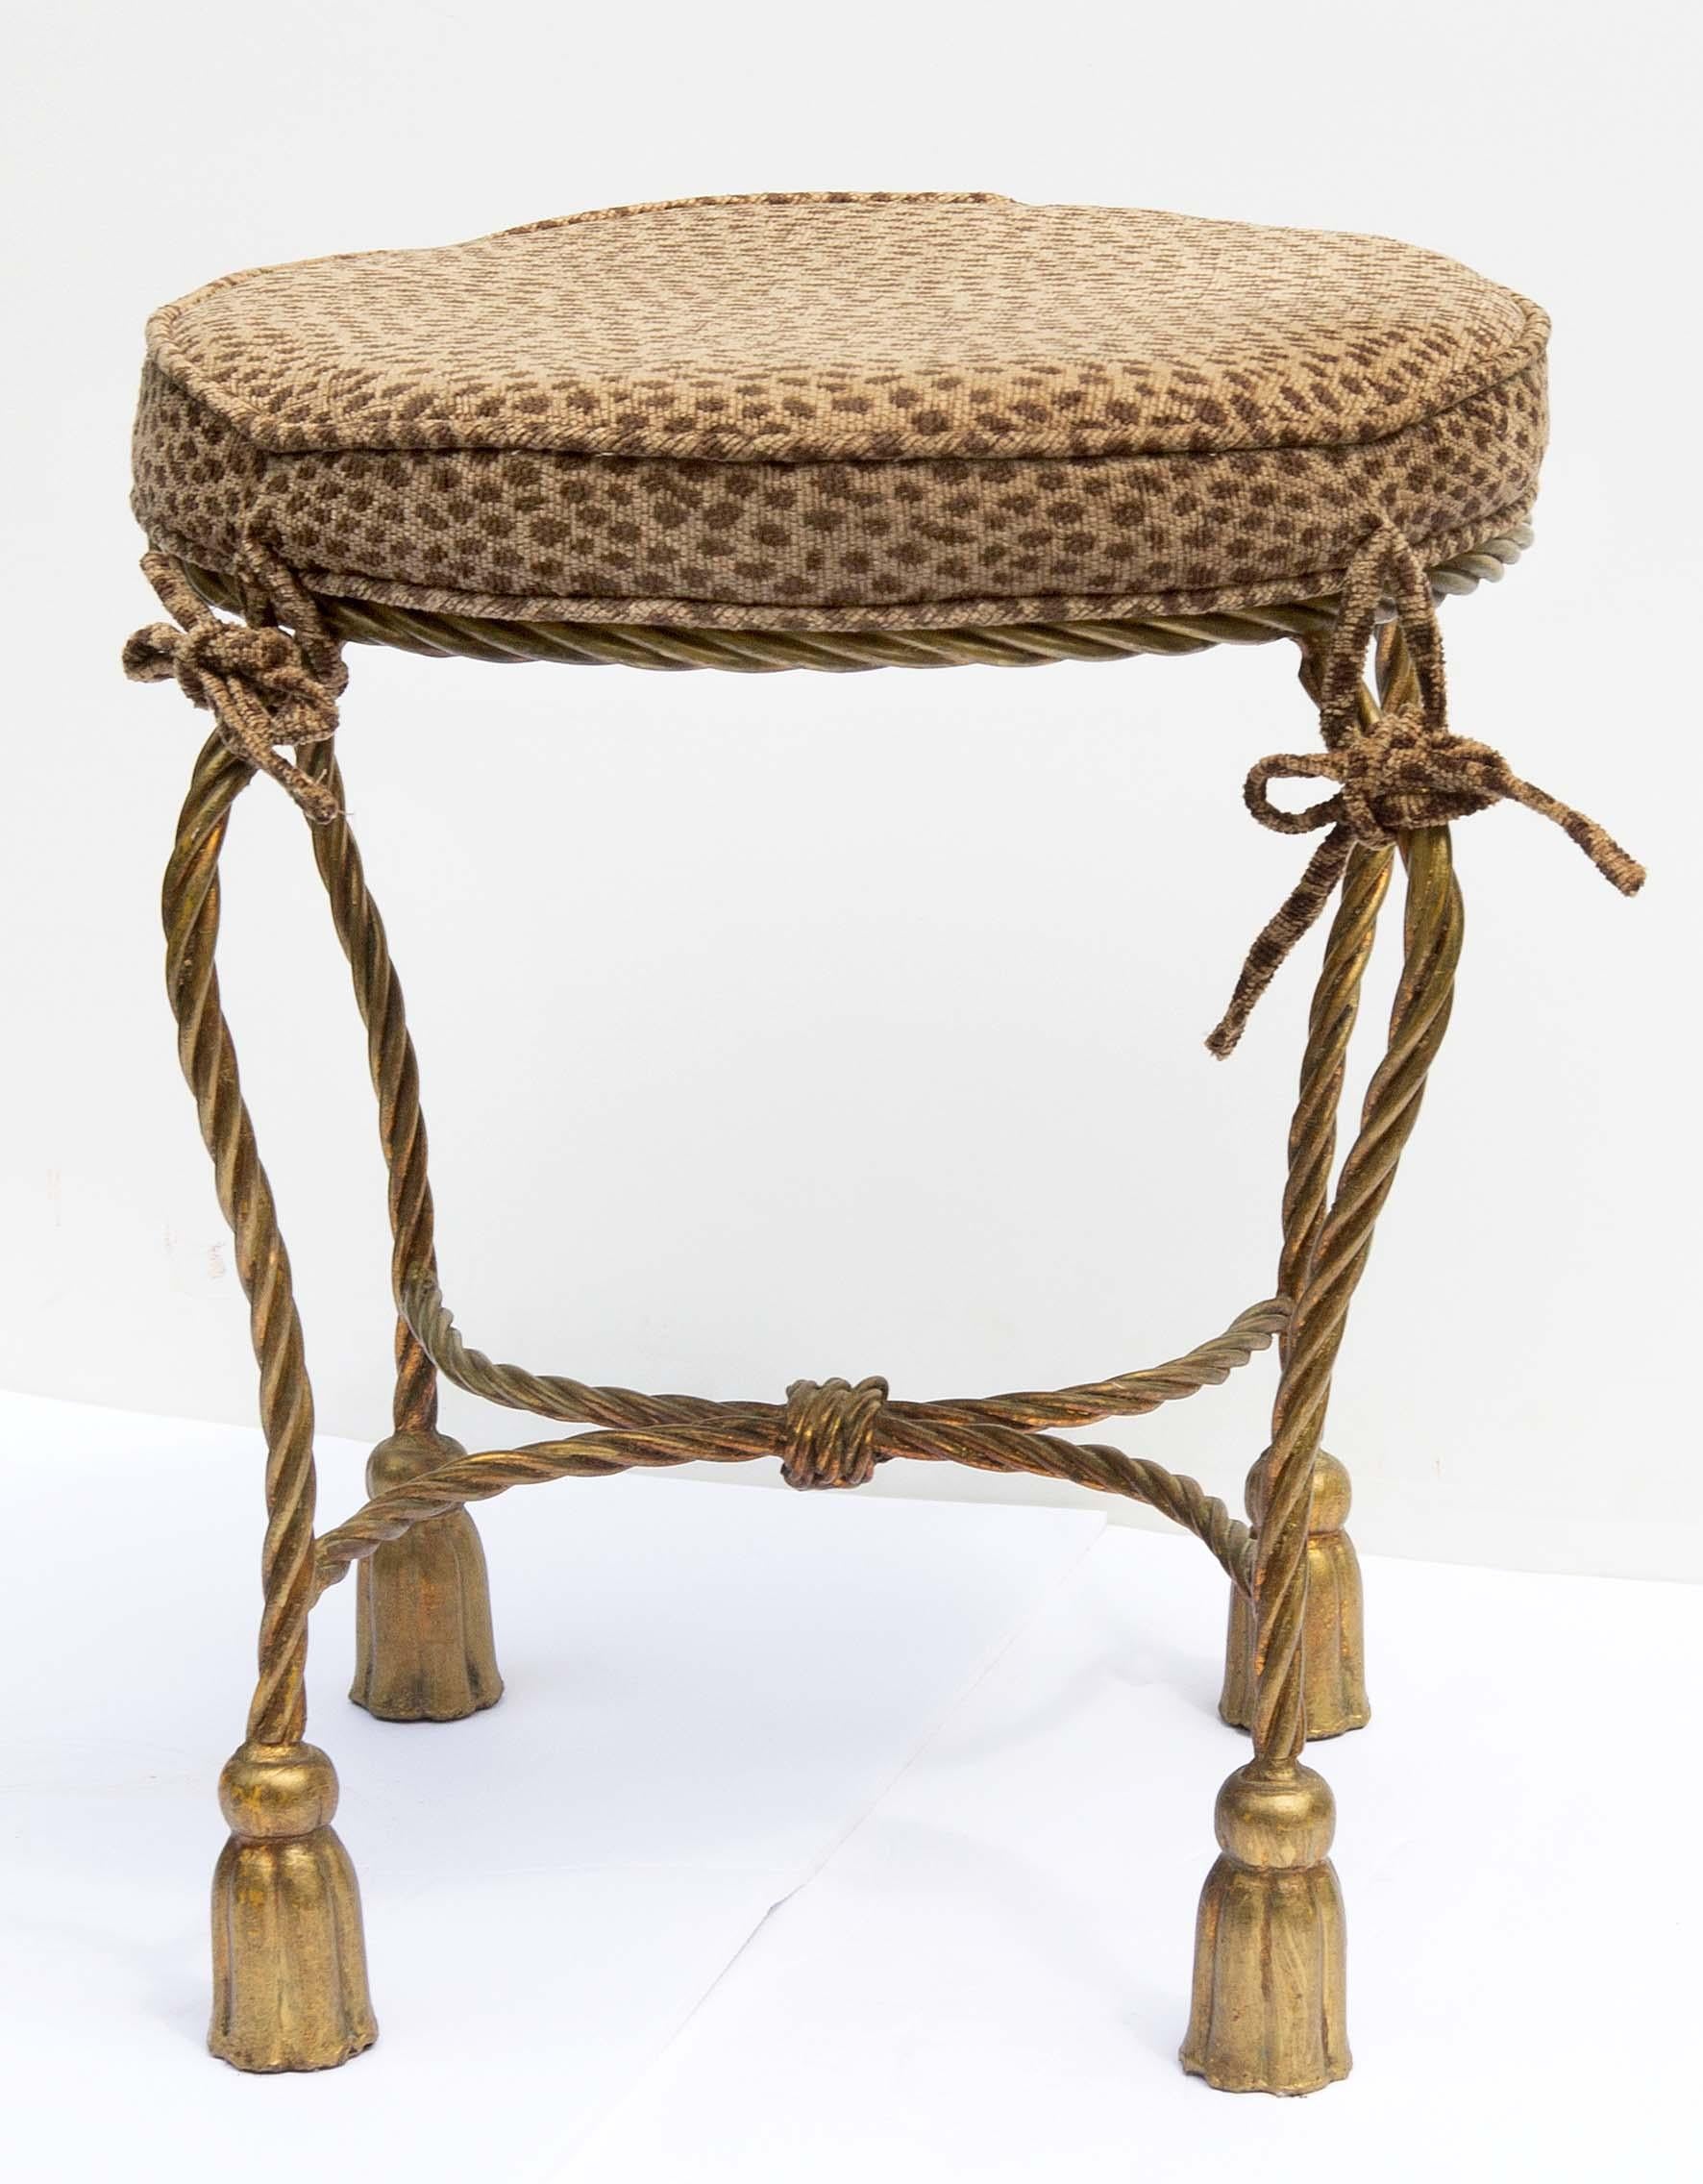 Vintage gilt metal rope and tassel vanity stool. Leopard print cushion. Hollywood regency. Circa 1960's. Please, contact us for shipping options.
Presented by Joseph Dasta Antiques